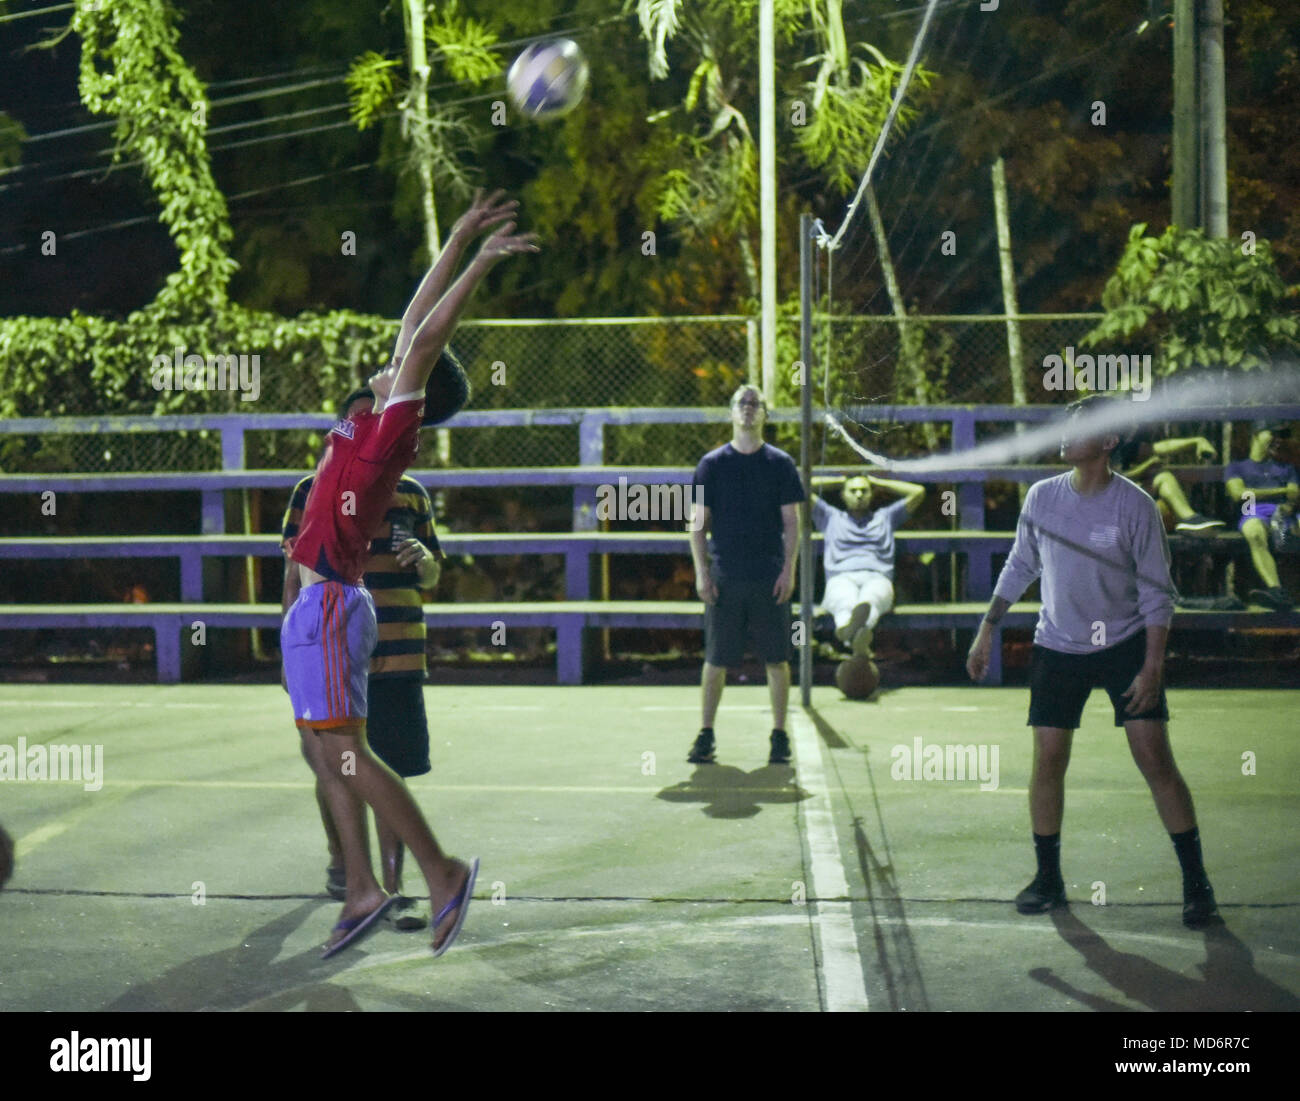 A Meteti, Panama, local citizen hits a ball during a volleyball match with U.S. military members participating in Exercise New Horizons 2018, March 27, 2018. Throughout the duration of the exercise, participants spend time engaging in sports and fun activities within the local community Exercise New Horizons is a joint training exercise where all branches of the U.S. military conduct training in civil engineer, medical and support services while benefiting the local community. (U.S. Air Force photo by Senior Airman Dustin Mullen/Released) Stock Photo